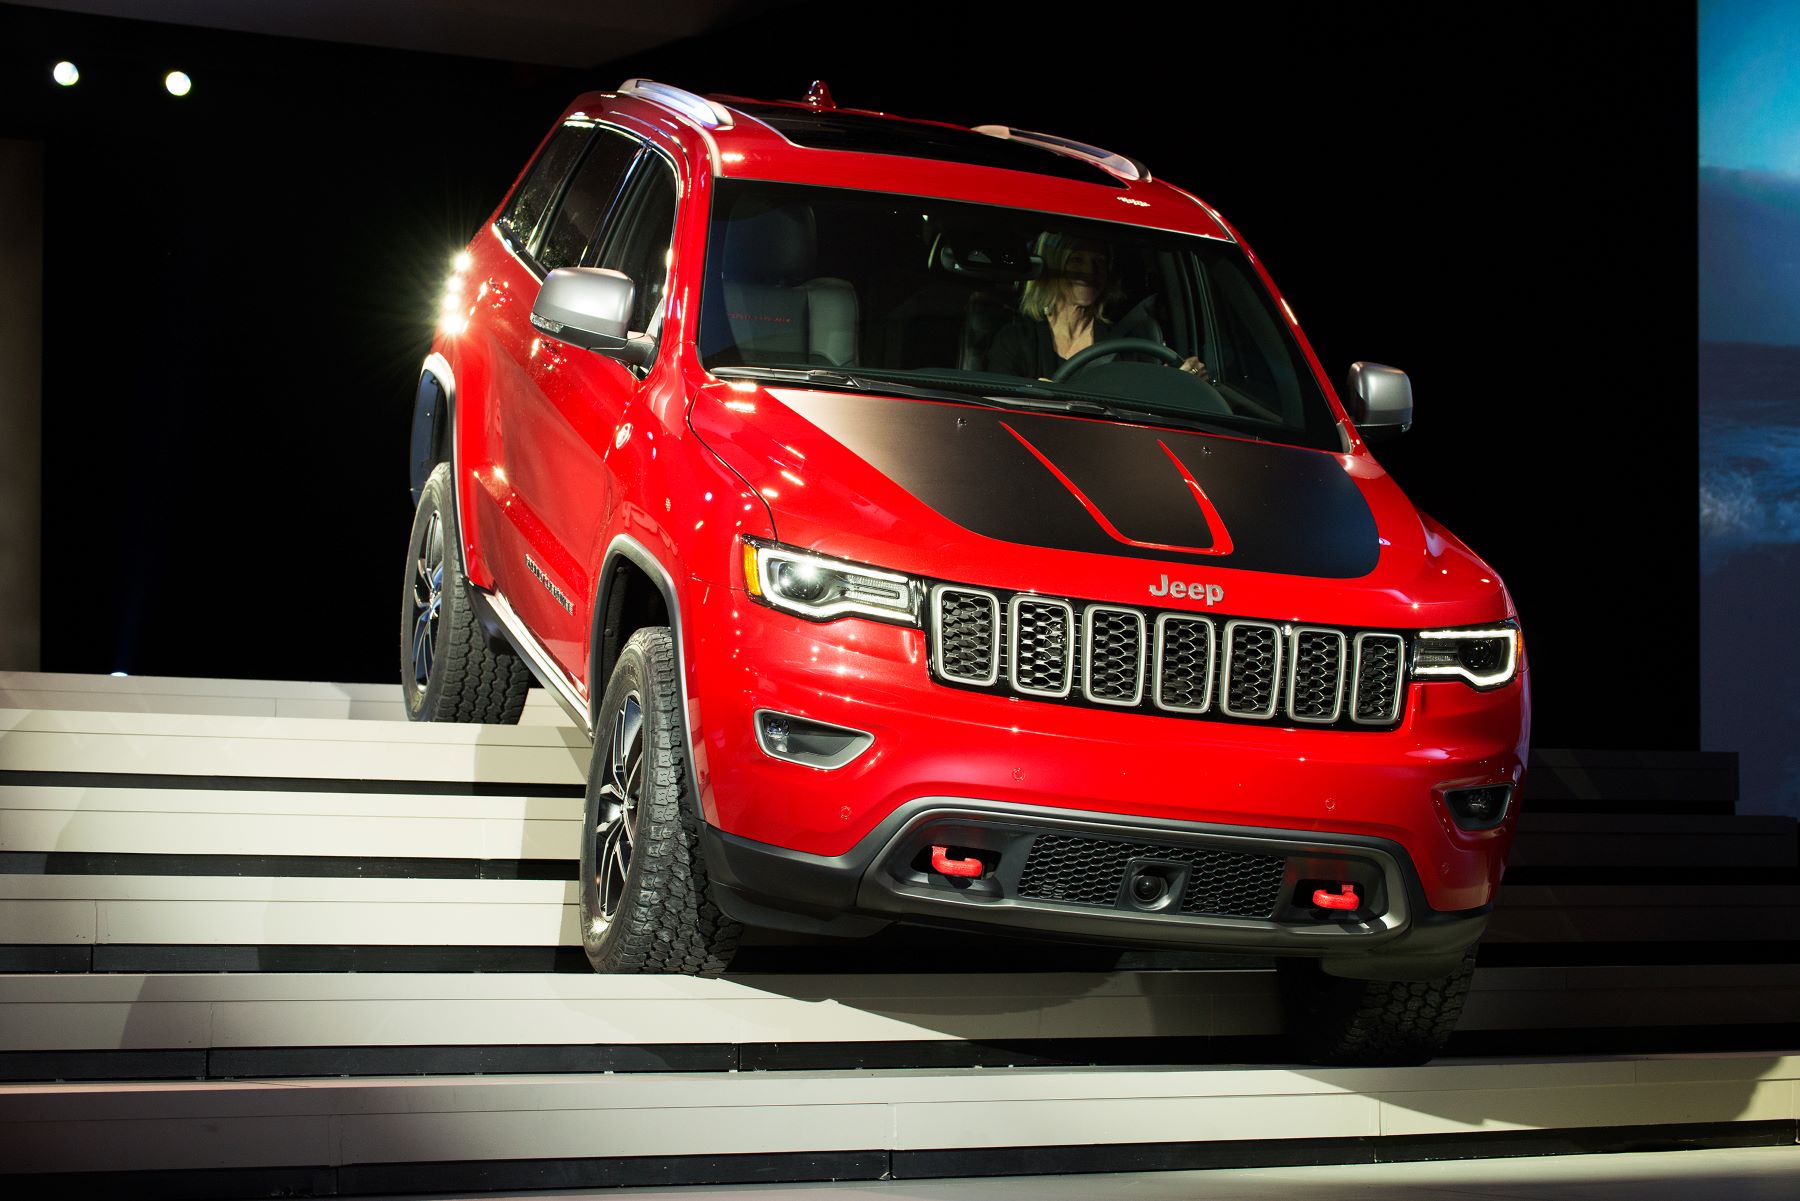 The Jeep Cherokee Trailhawk compact SUV presented at the 2016 New York International Auto Show